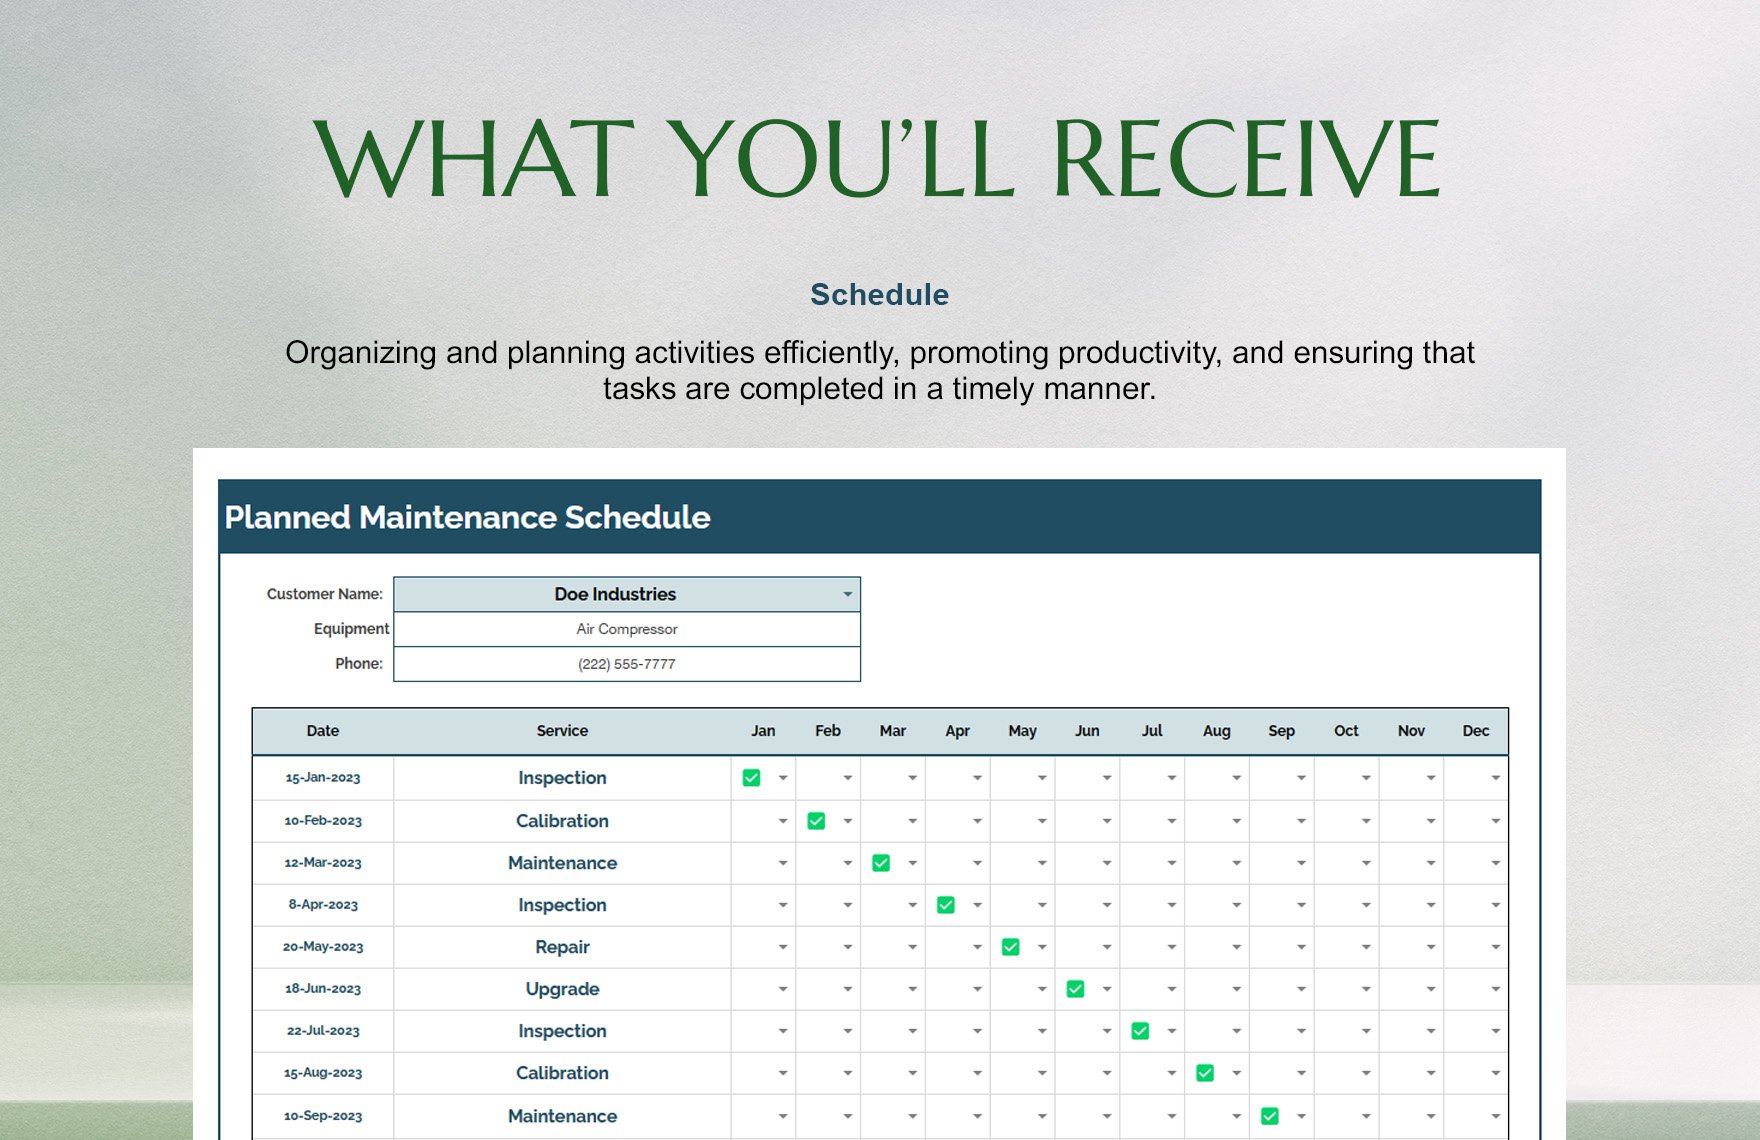 Planned Maintenance Schedule Template